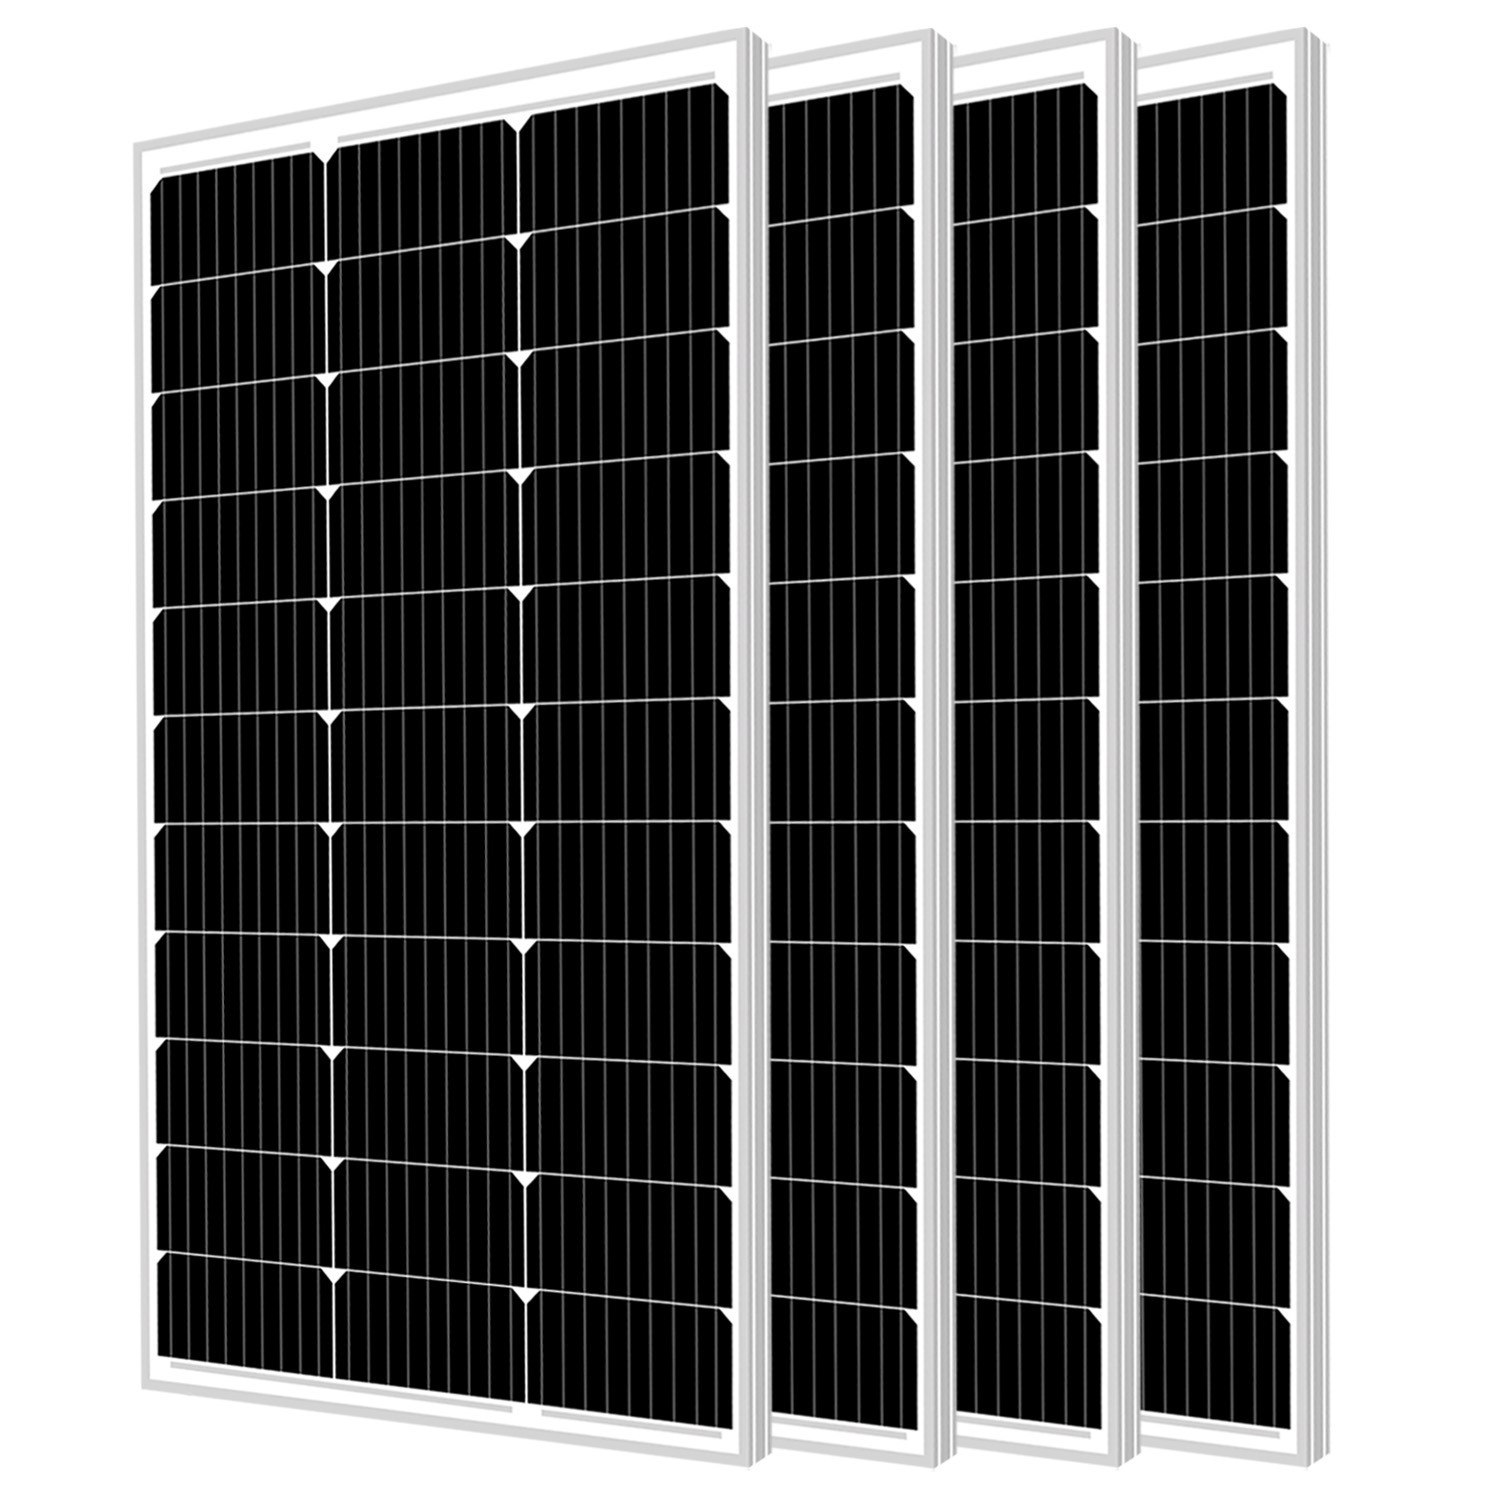 100W Solar Panel 12V Mono Off Grid Battery Charger for Off-Grid Applications RNG-100D-SS - 4 Pack